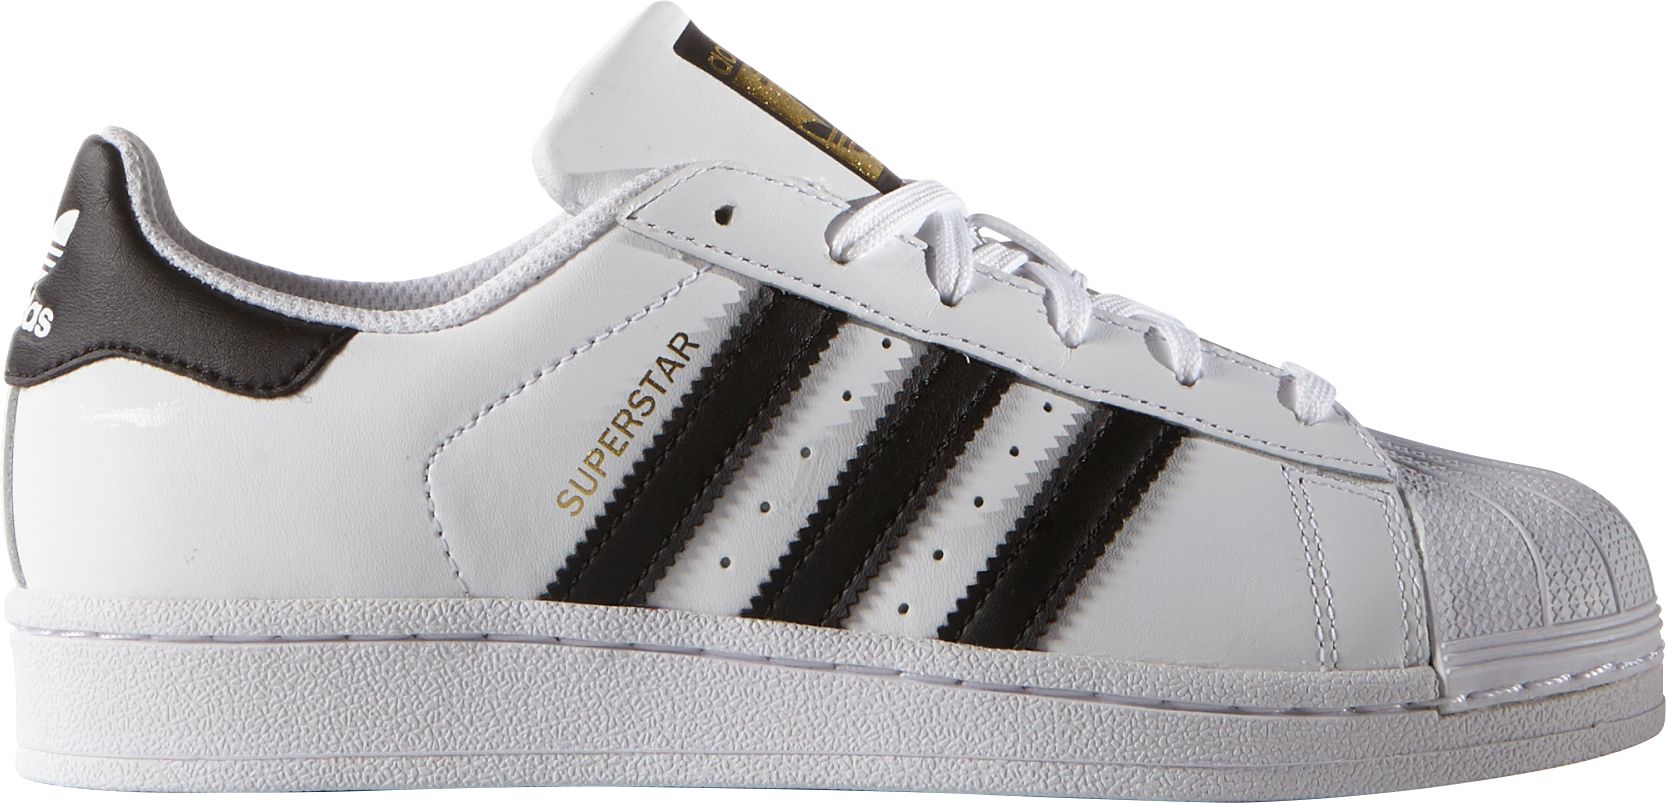 adidas shoes purchase online